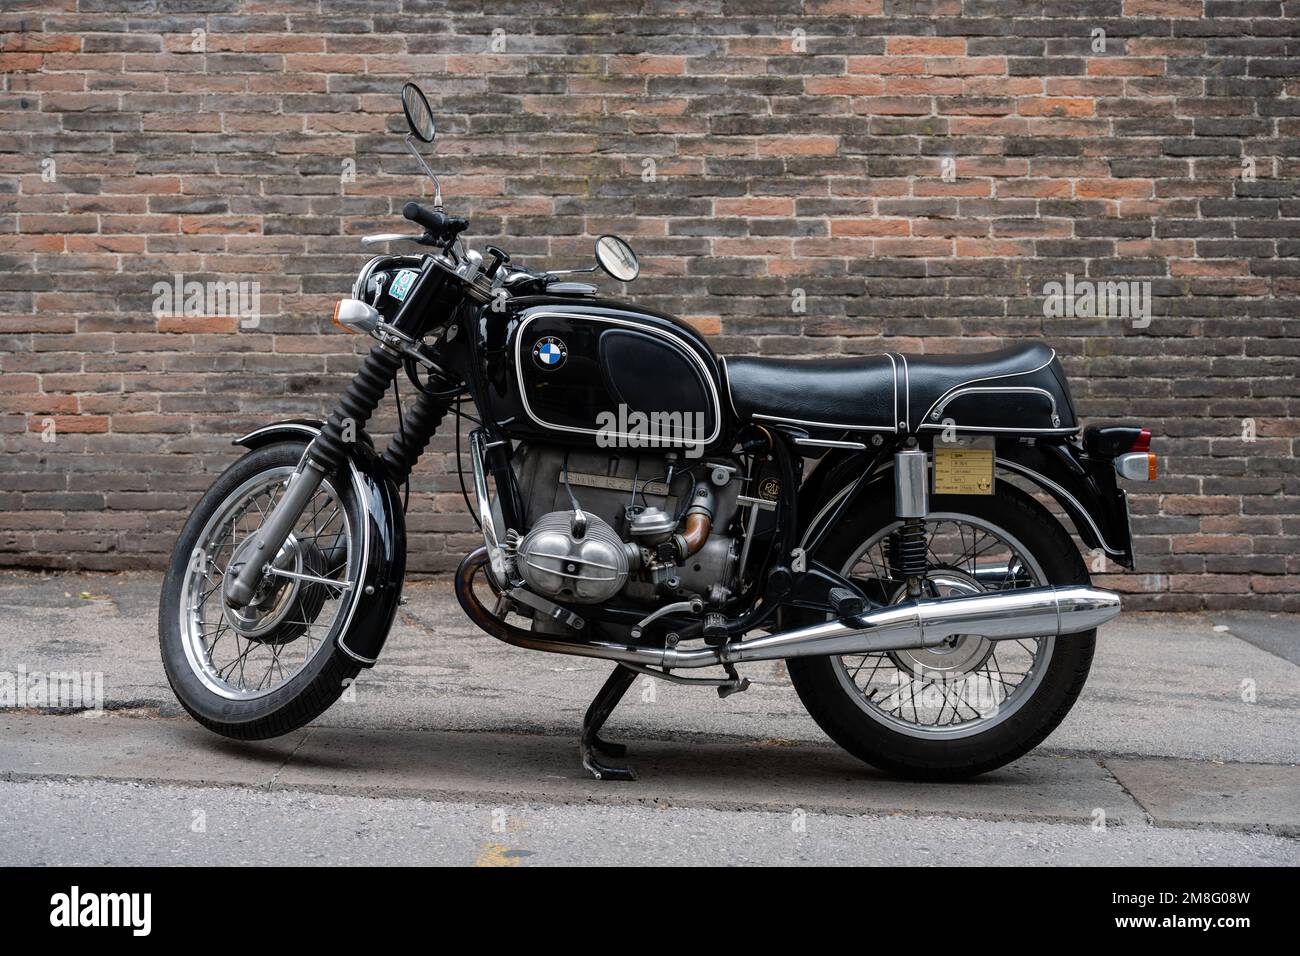 Vicenza, Italy - August 12 2022: Black Vintage BMW R 75/5, a classic 1970s Motorcycle or Motorbike Stock Photo